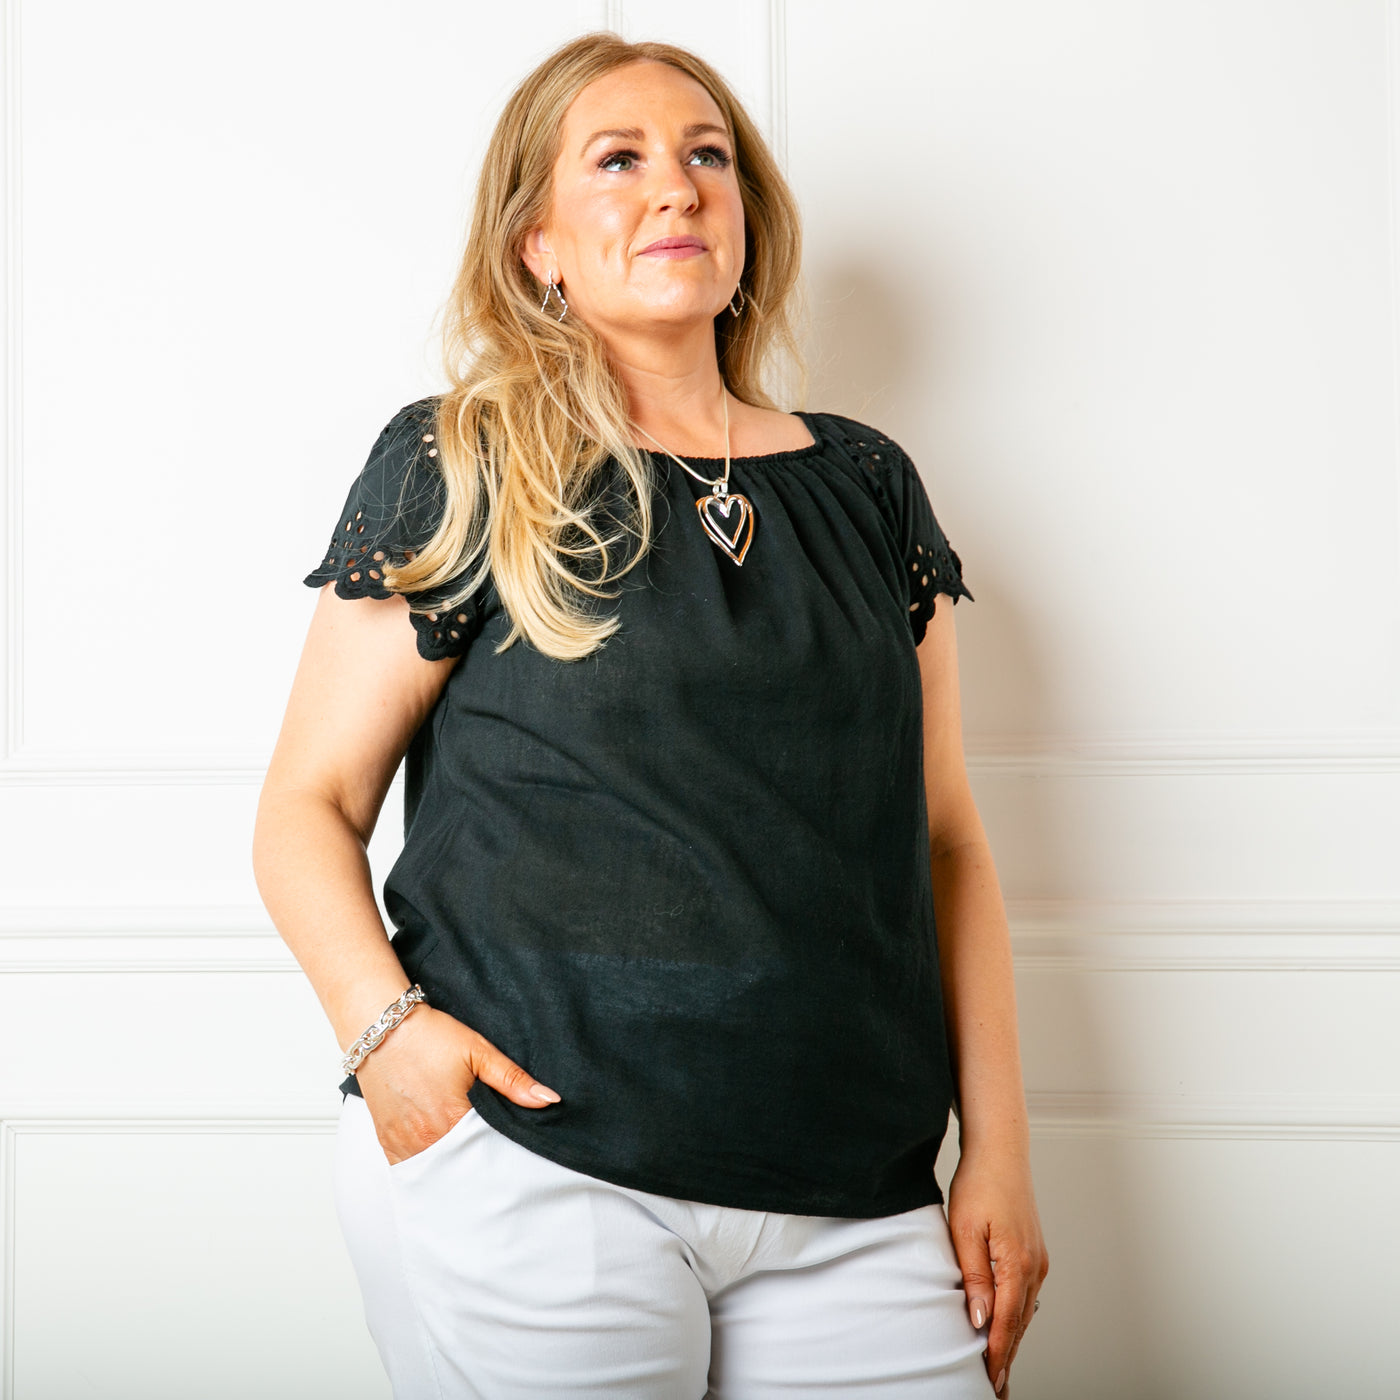 The black Linen Blend Flutter Top with an elasticated bardot neckline so the top can be worn on or off the shoulder